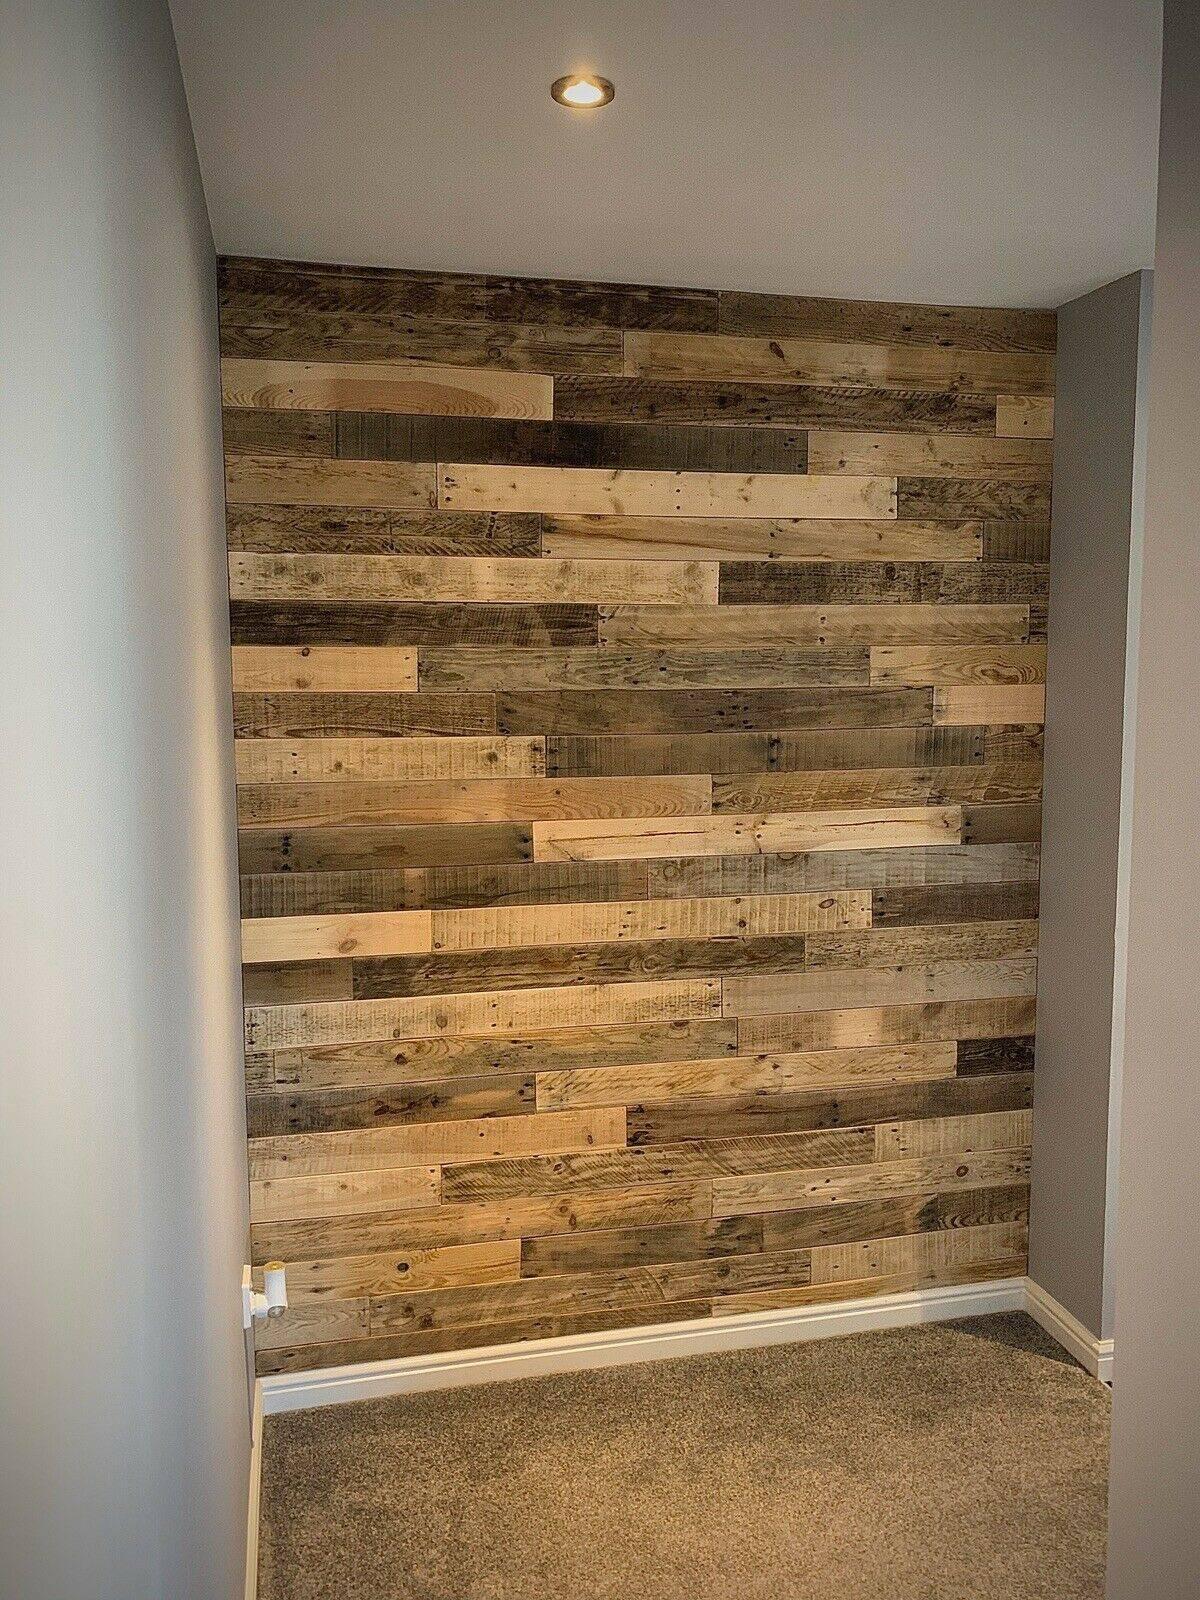 Reclaimed Pallet Planks 100 Boards - Unique Woodworking Projects - Anpio woods ltd